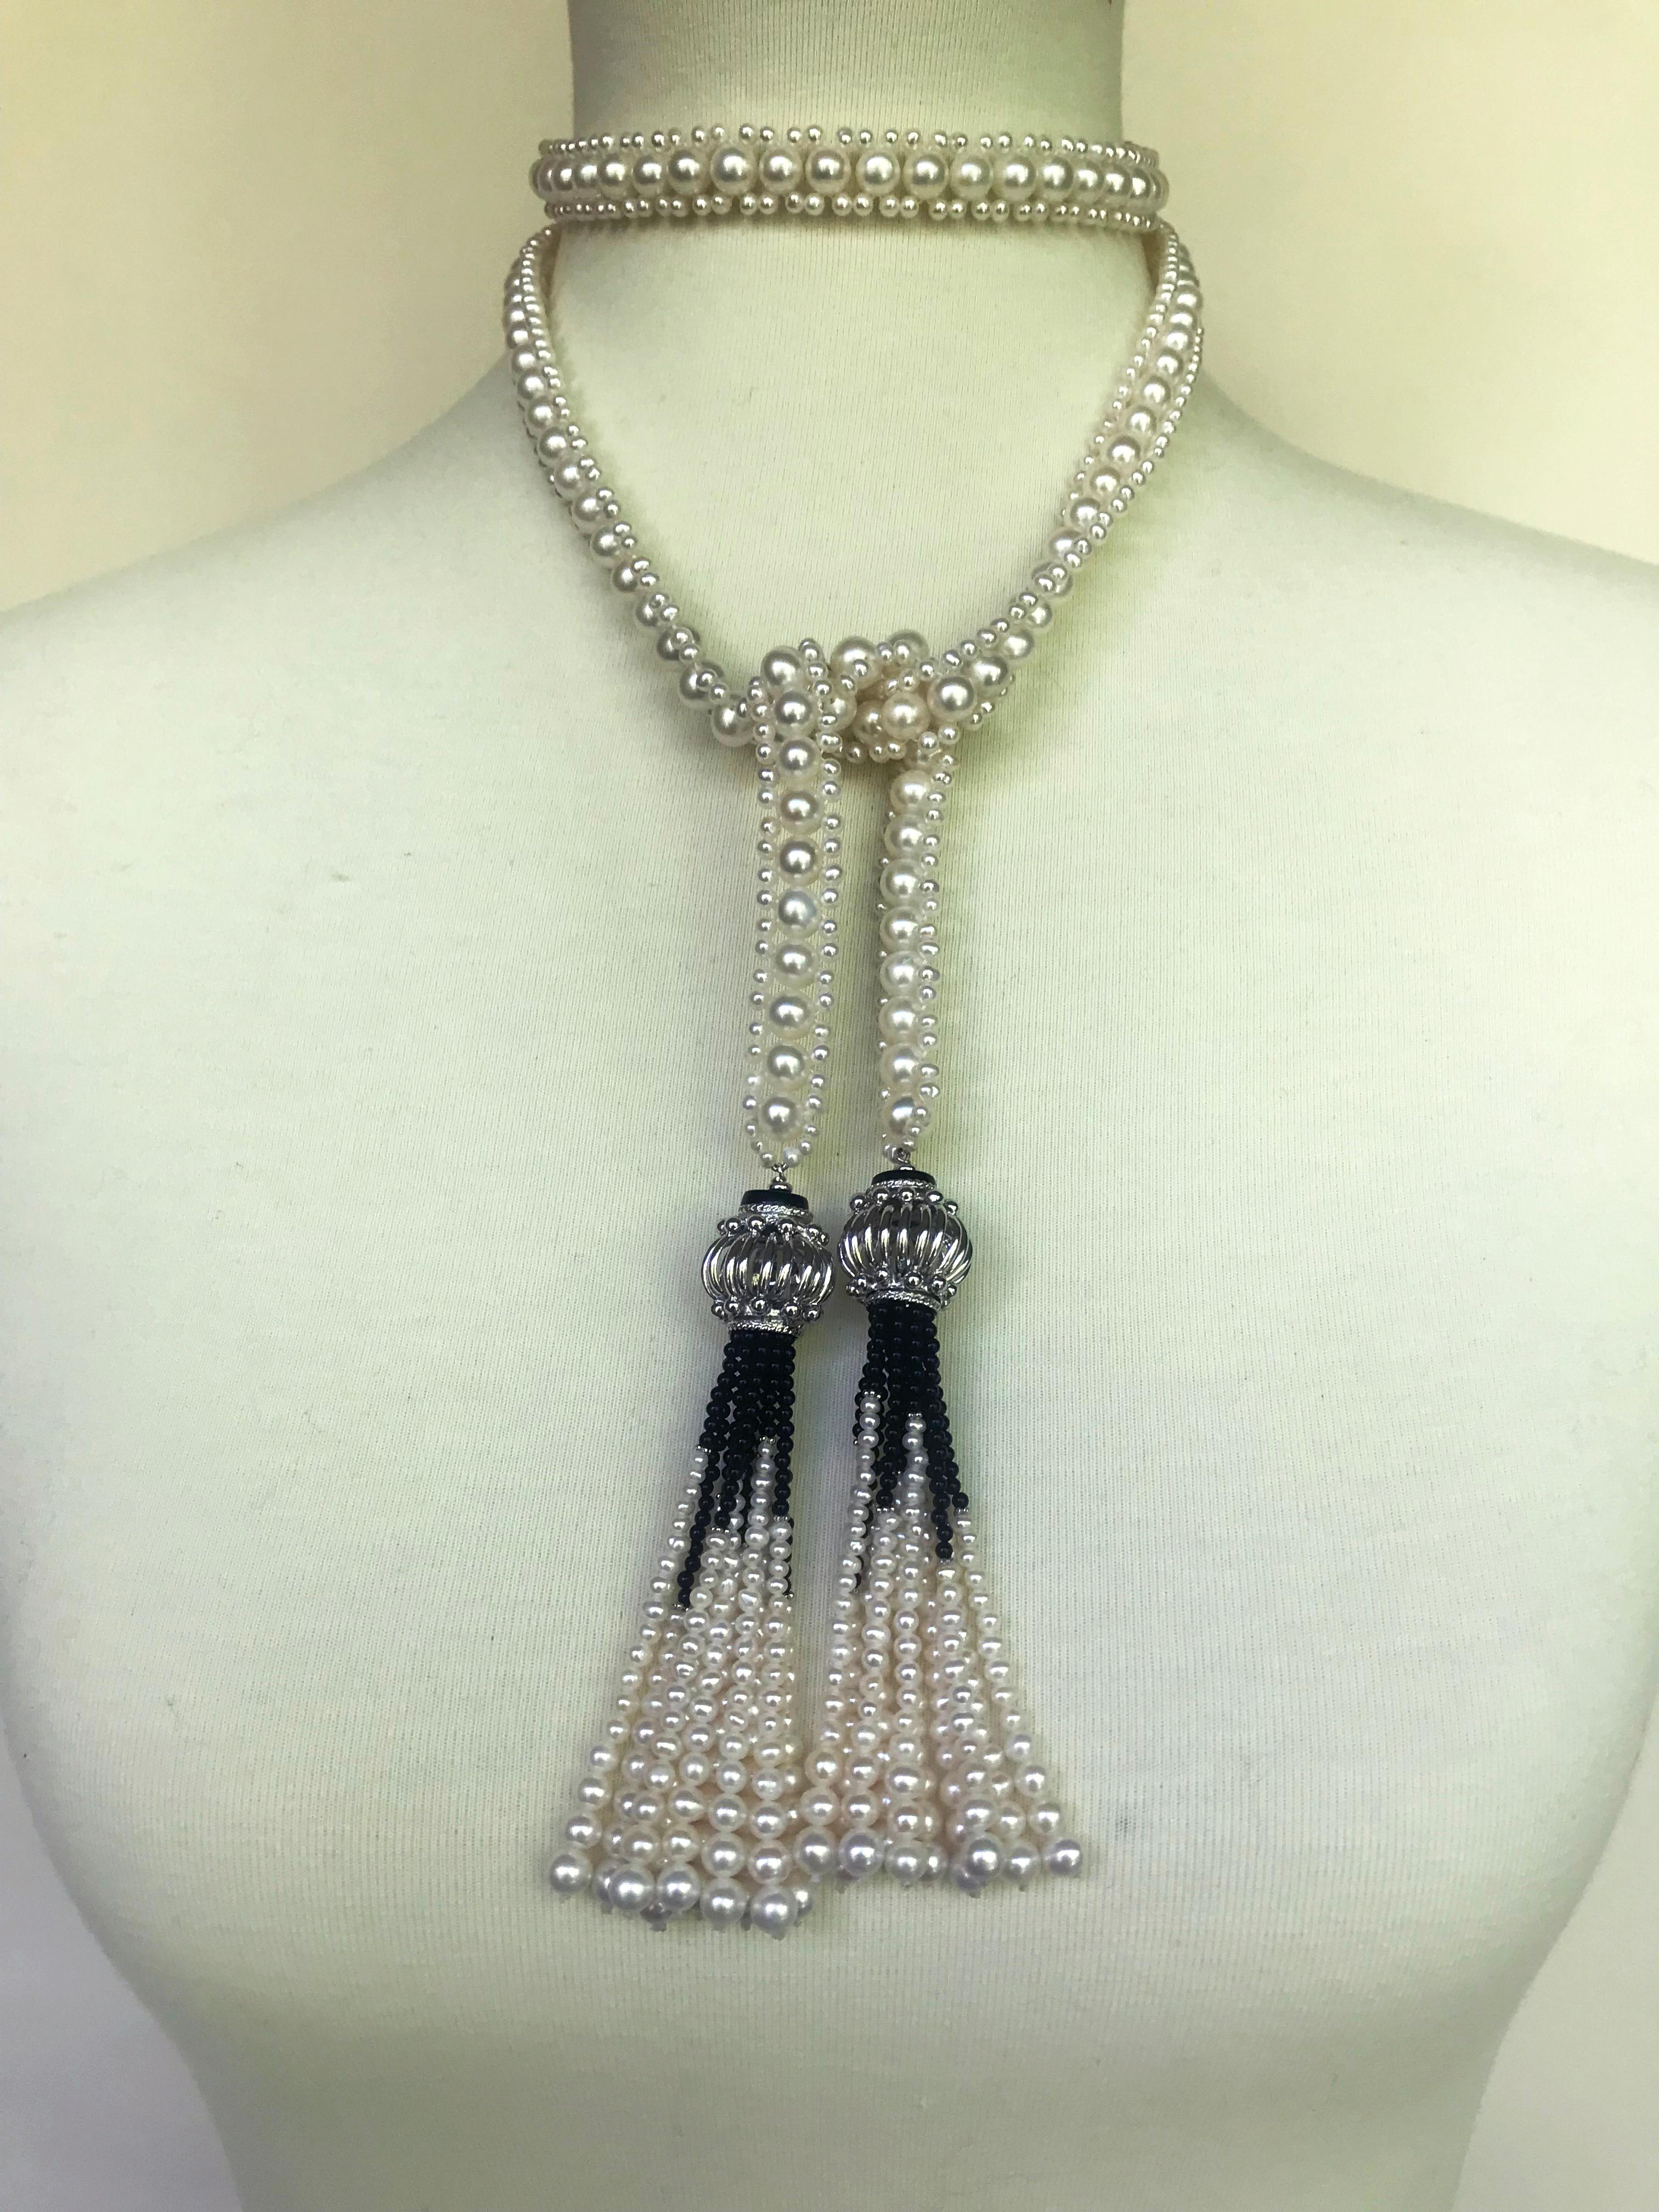 Artist Marina J Woven Pearl and Onyx Sautoir with Silver Bead, Spinel and Pearl Tassels